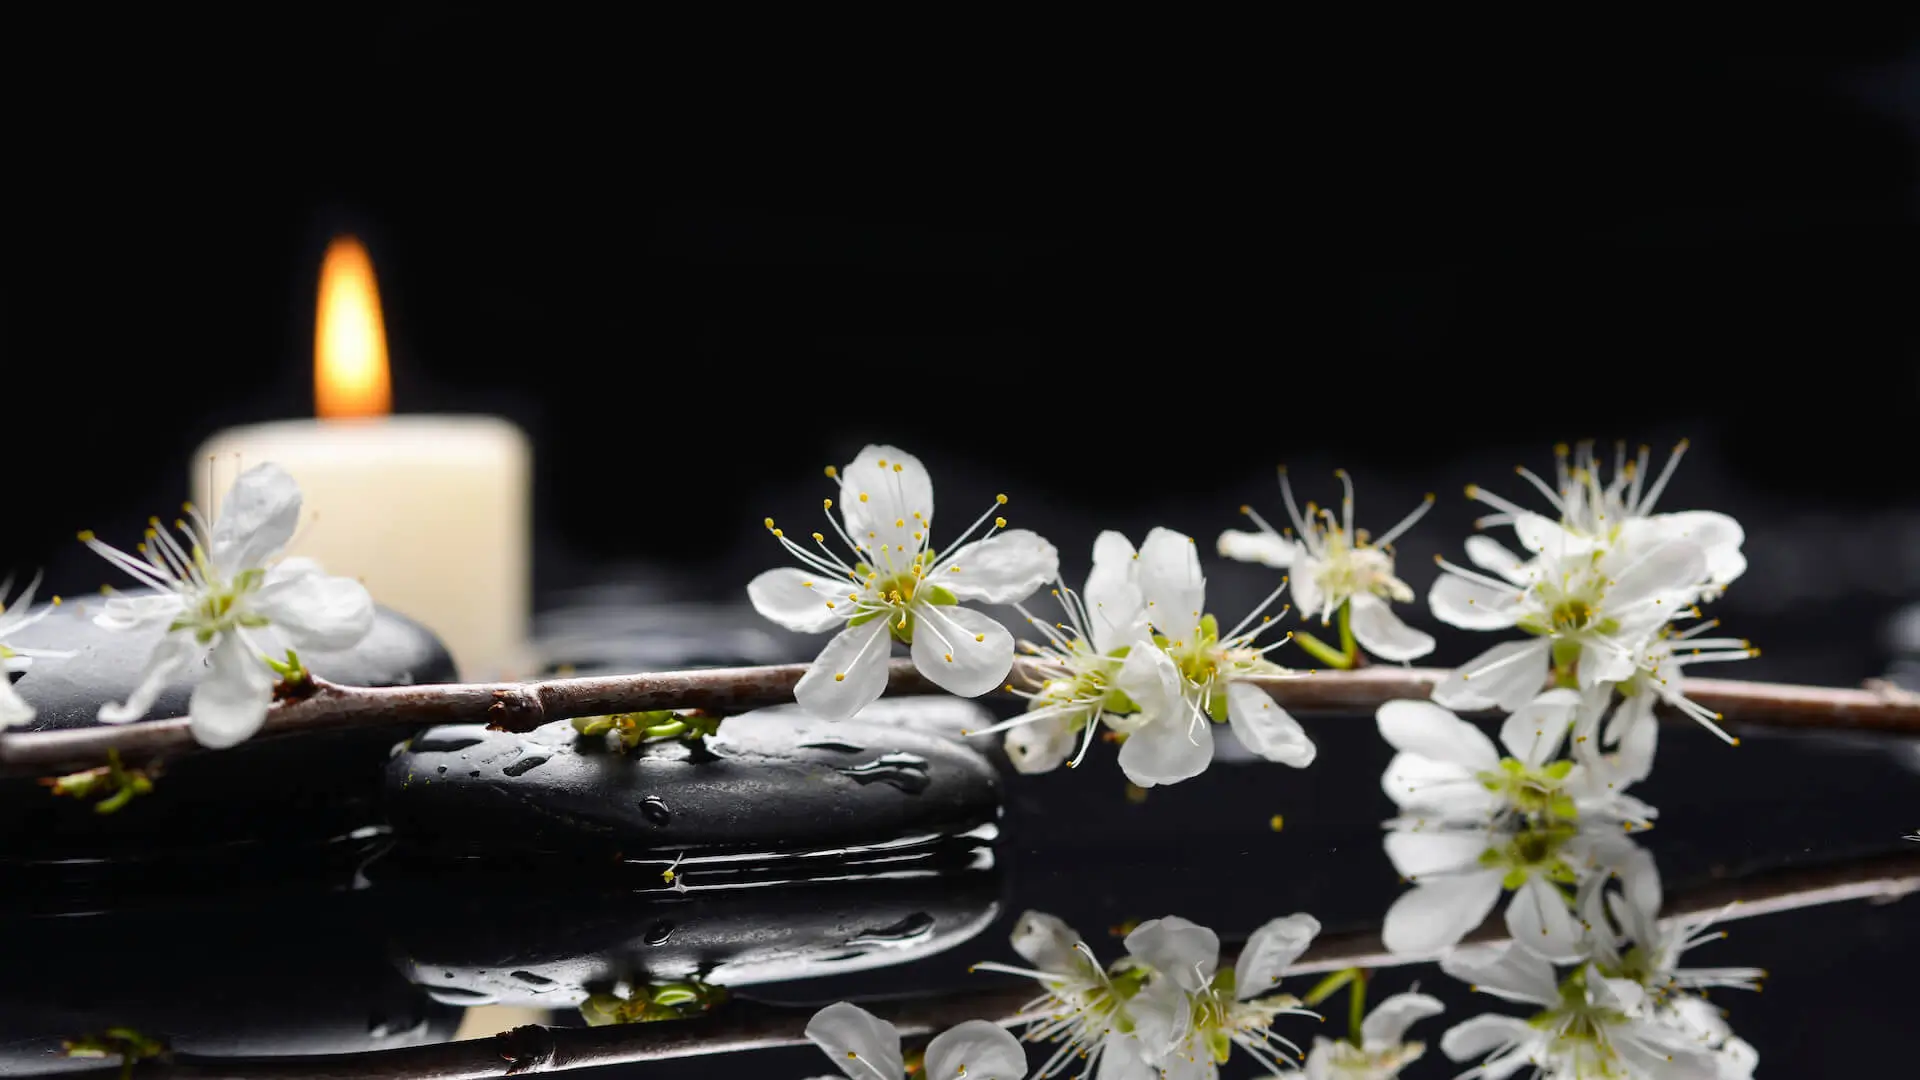 Still life with Cherry blossom, with candle on therapy stones